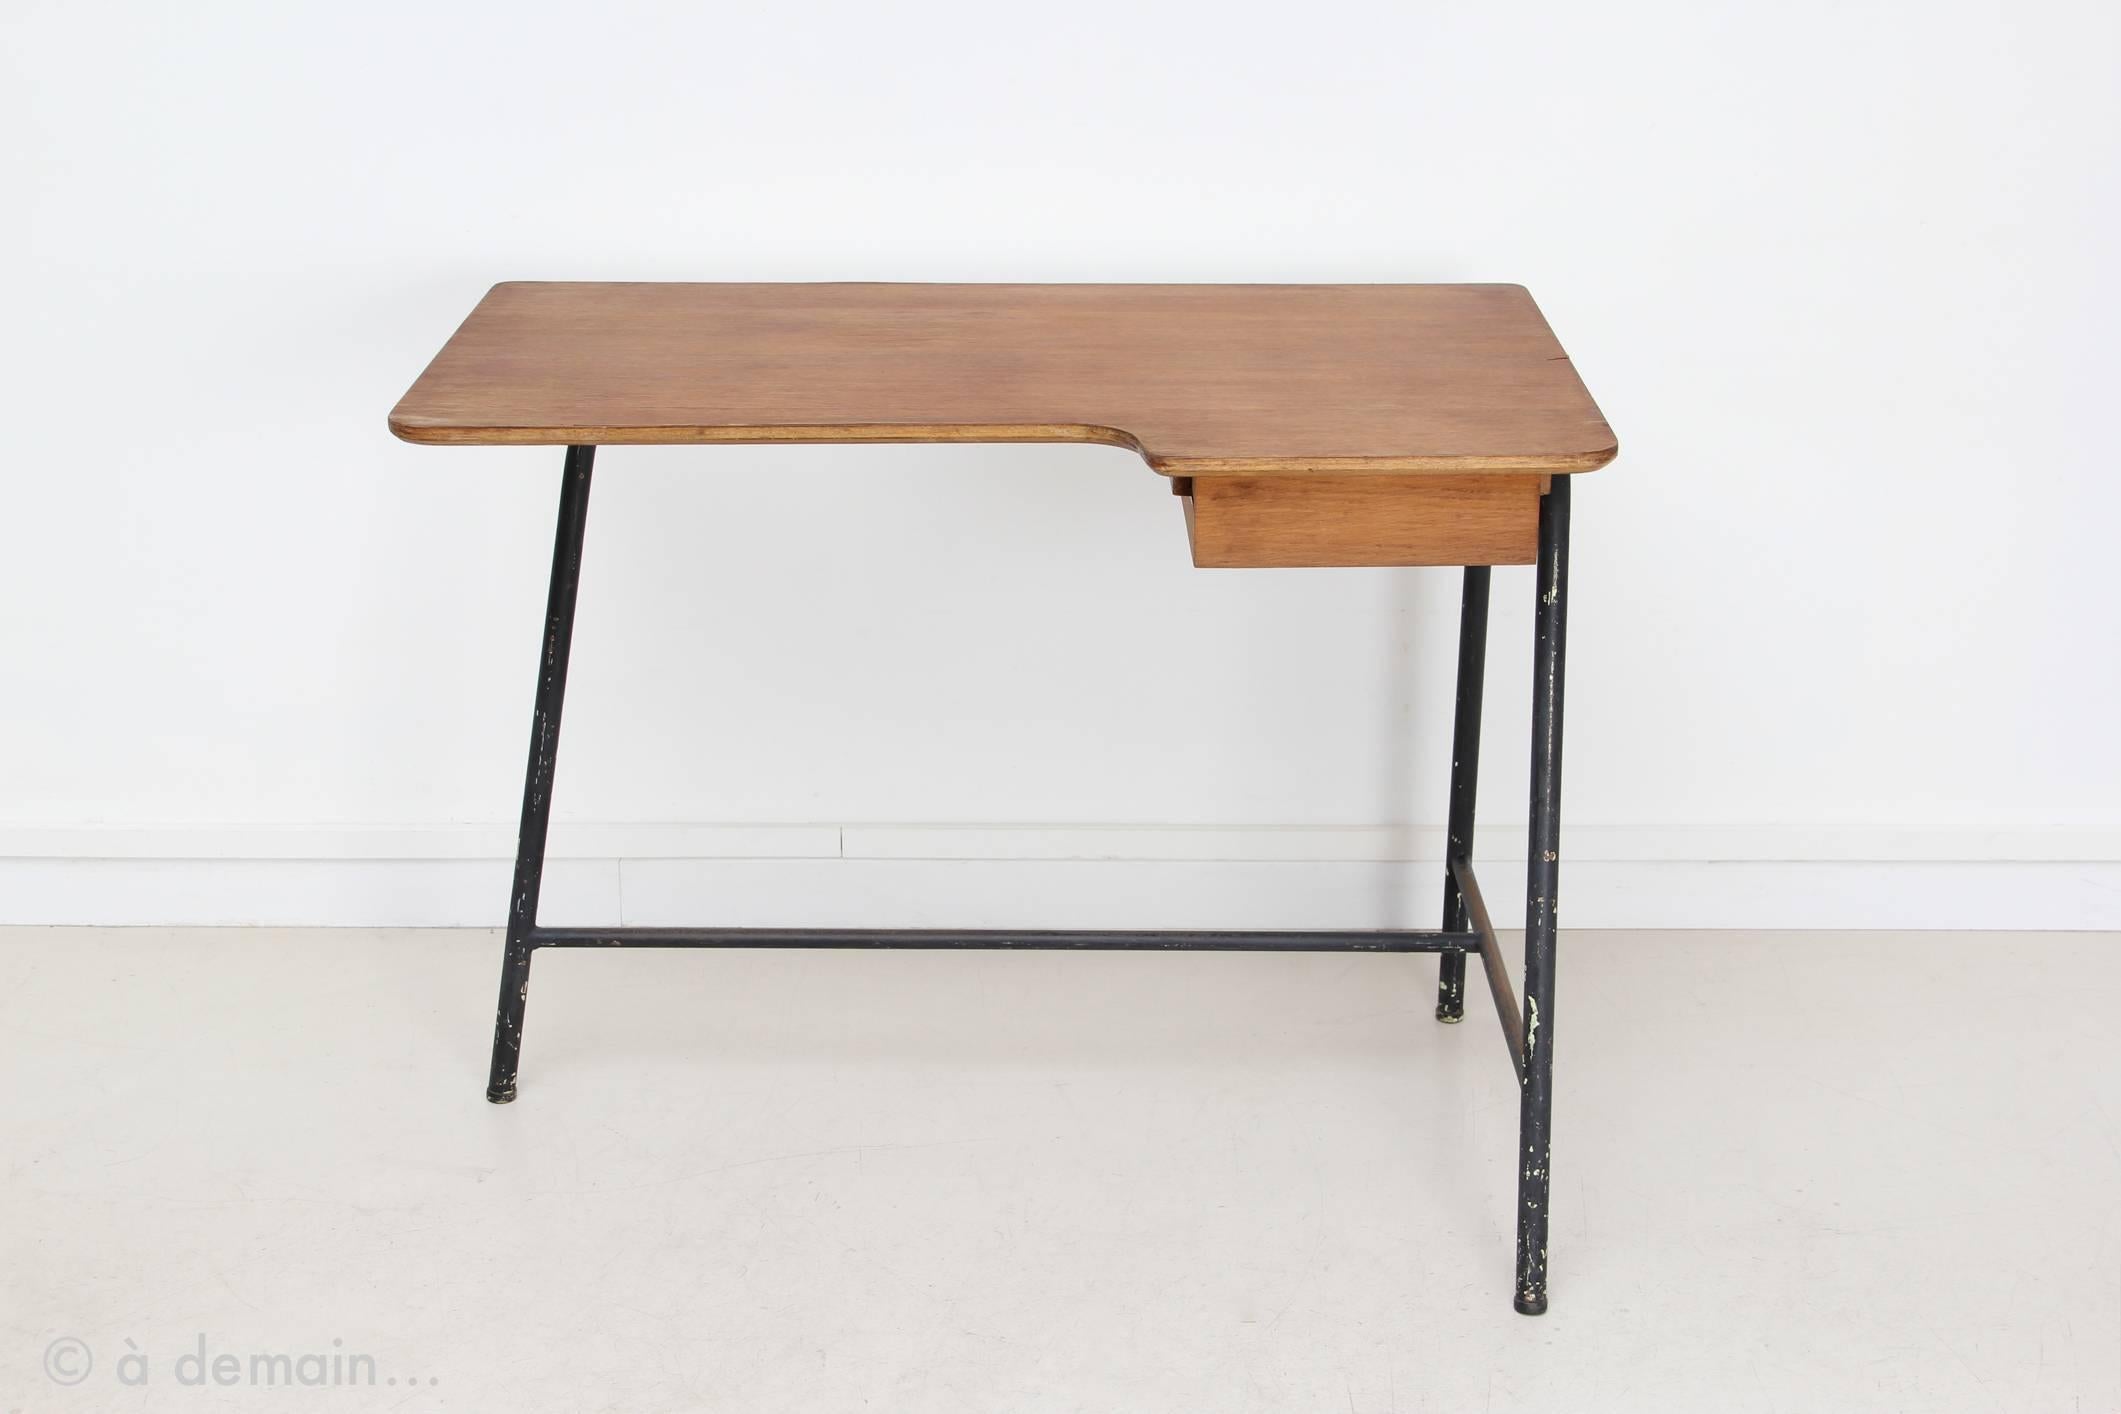 The French designer Jacques Hitier (1917 -1999) is famous for his functionalist, sophisticated, meticulous and beautiful style.

Beautiful and rare tripod desk with one drawer.
Oak wood and tubular metal.
One tiny missing part on the tray